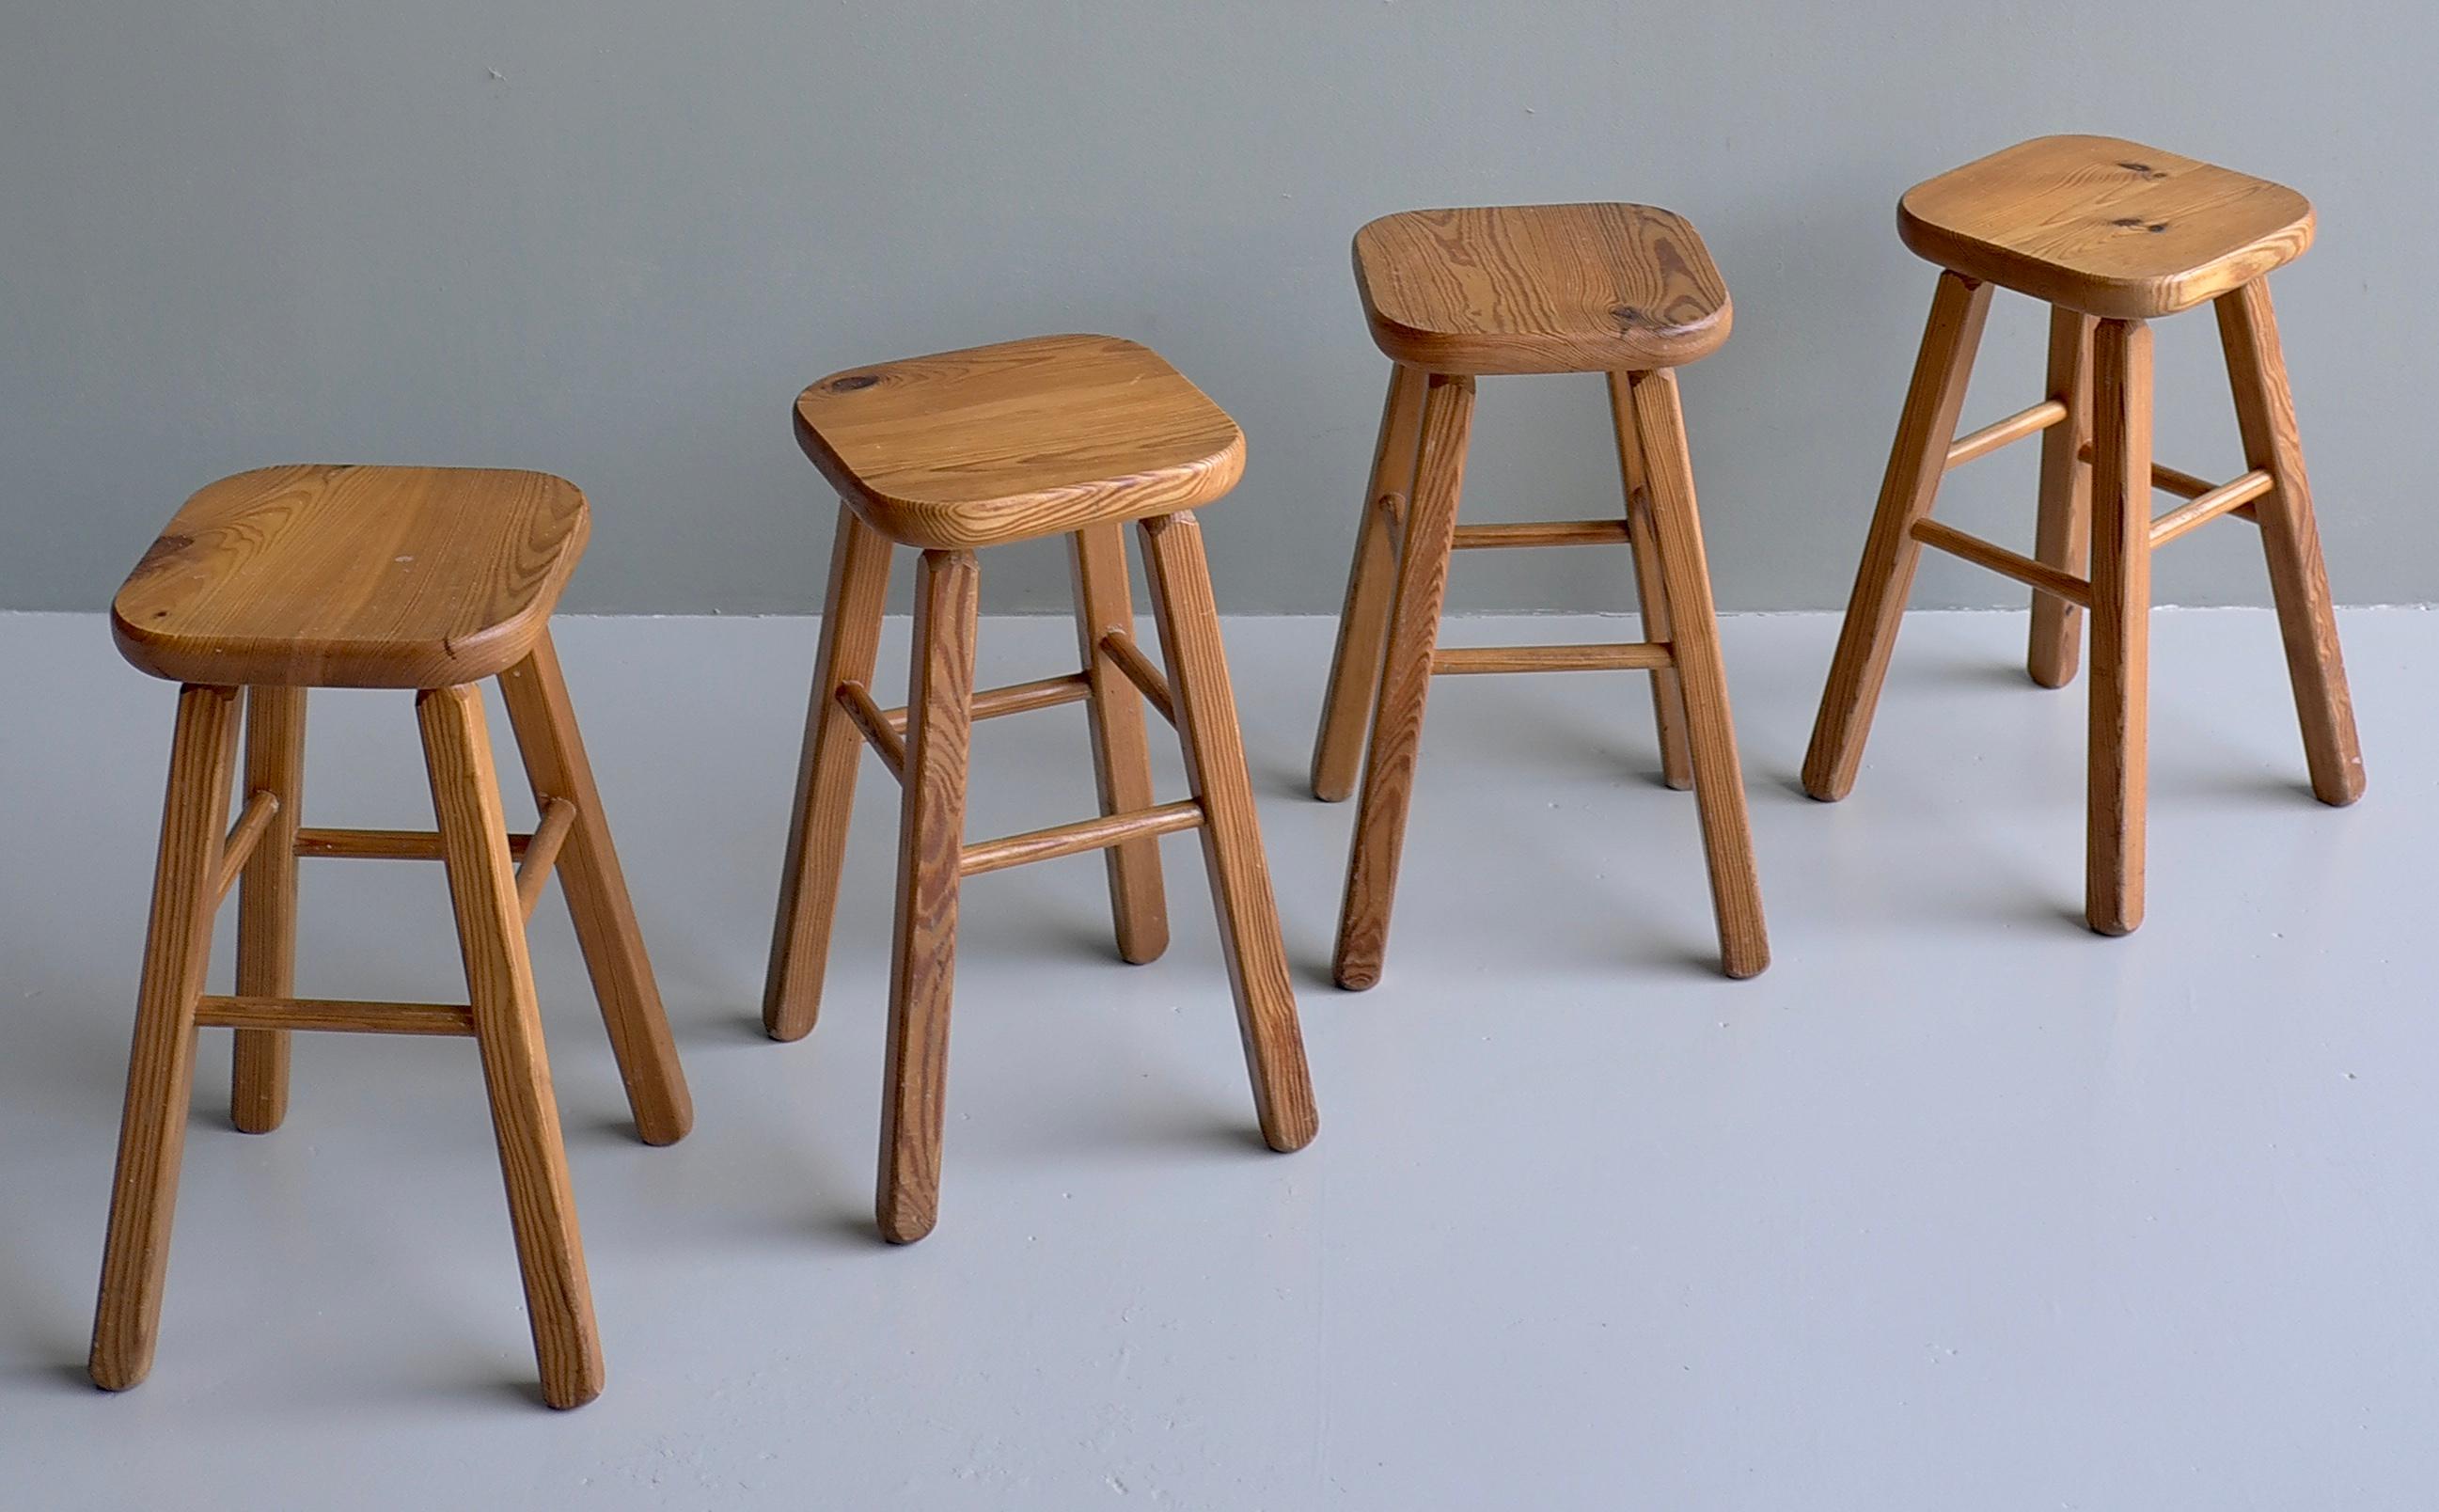 Solid Pine Stools in style of Charlotte Perriand, France 1960's For Sale 1